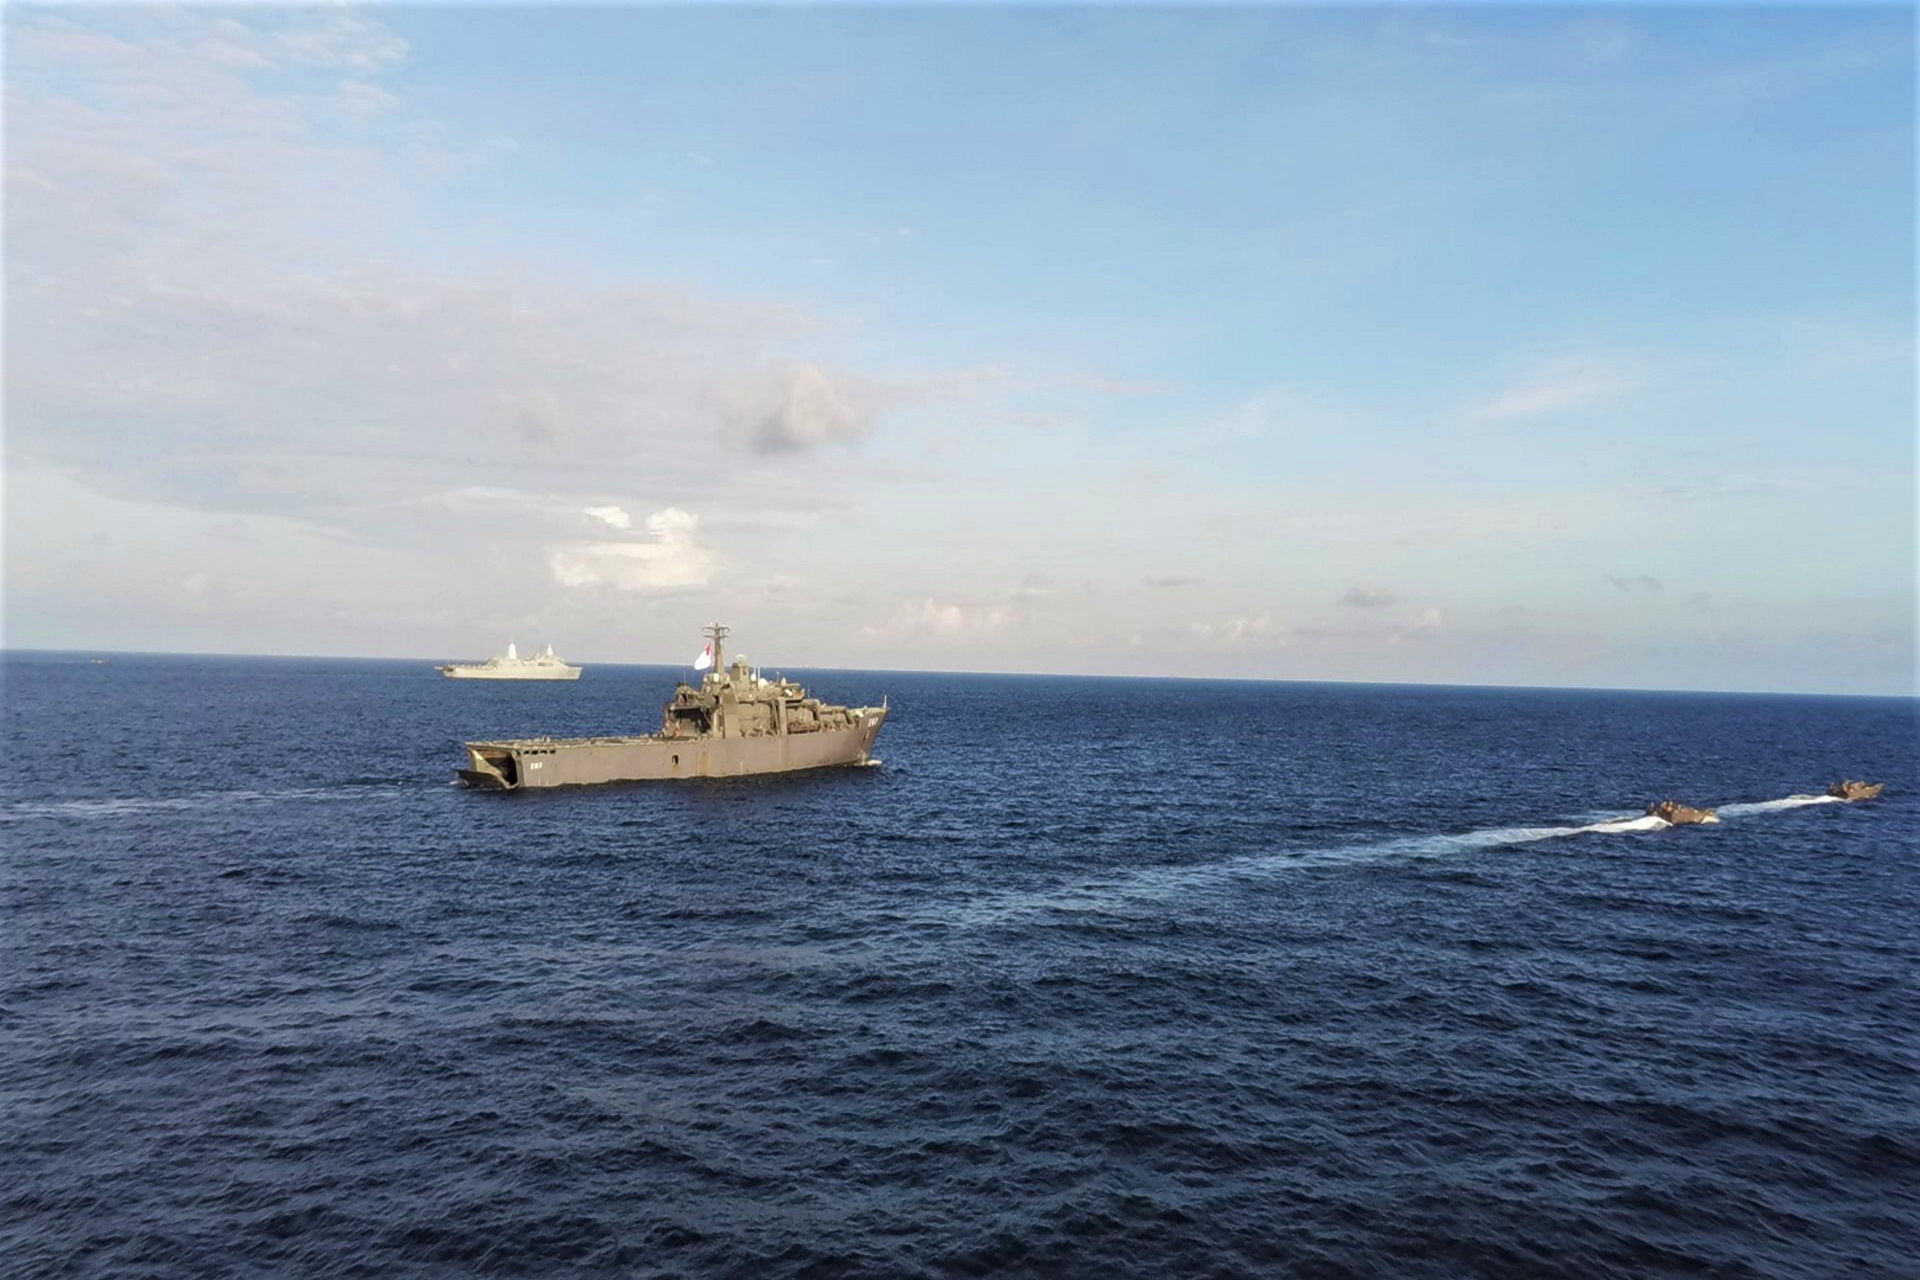 USS Somerset  (left, back), RSS Endurance (middle) and two RSN Fast Craft Utility units (right) during the exercise.